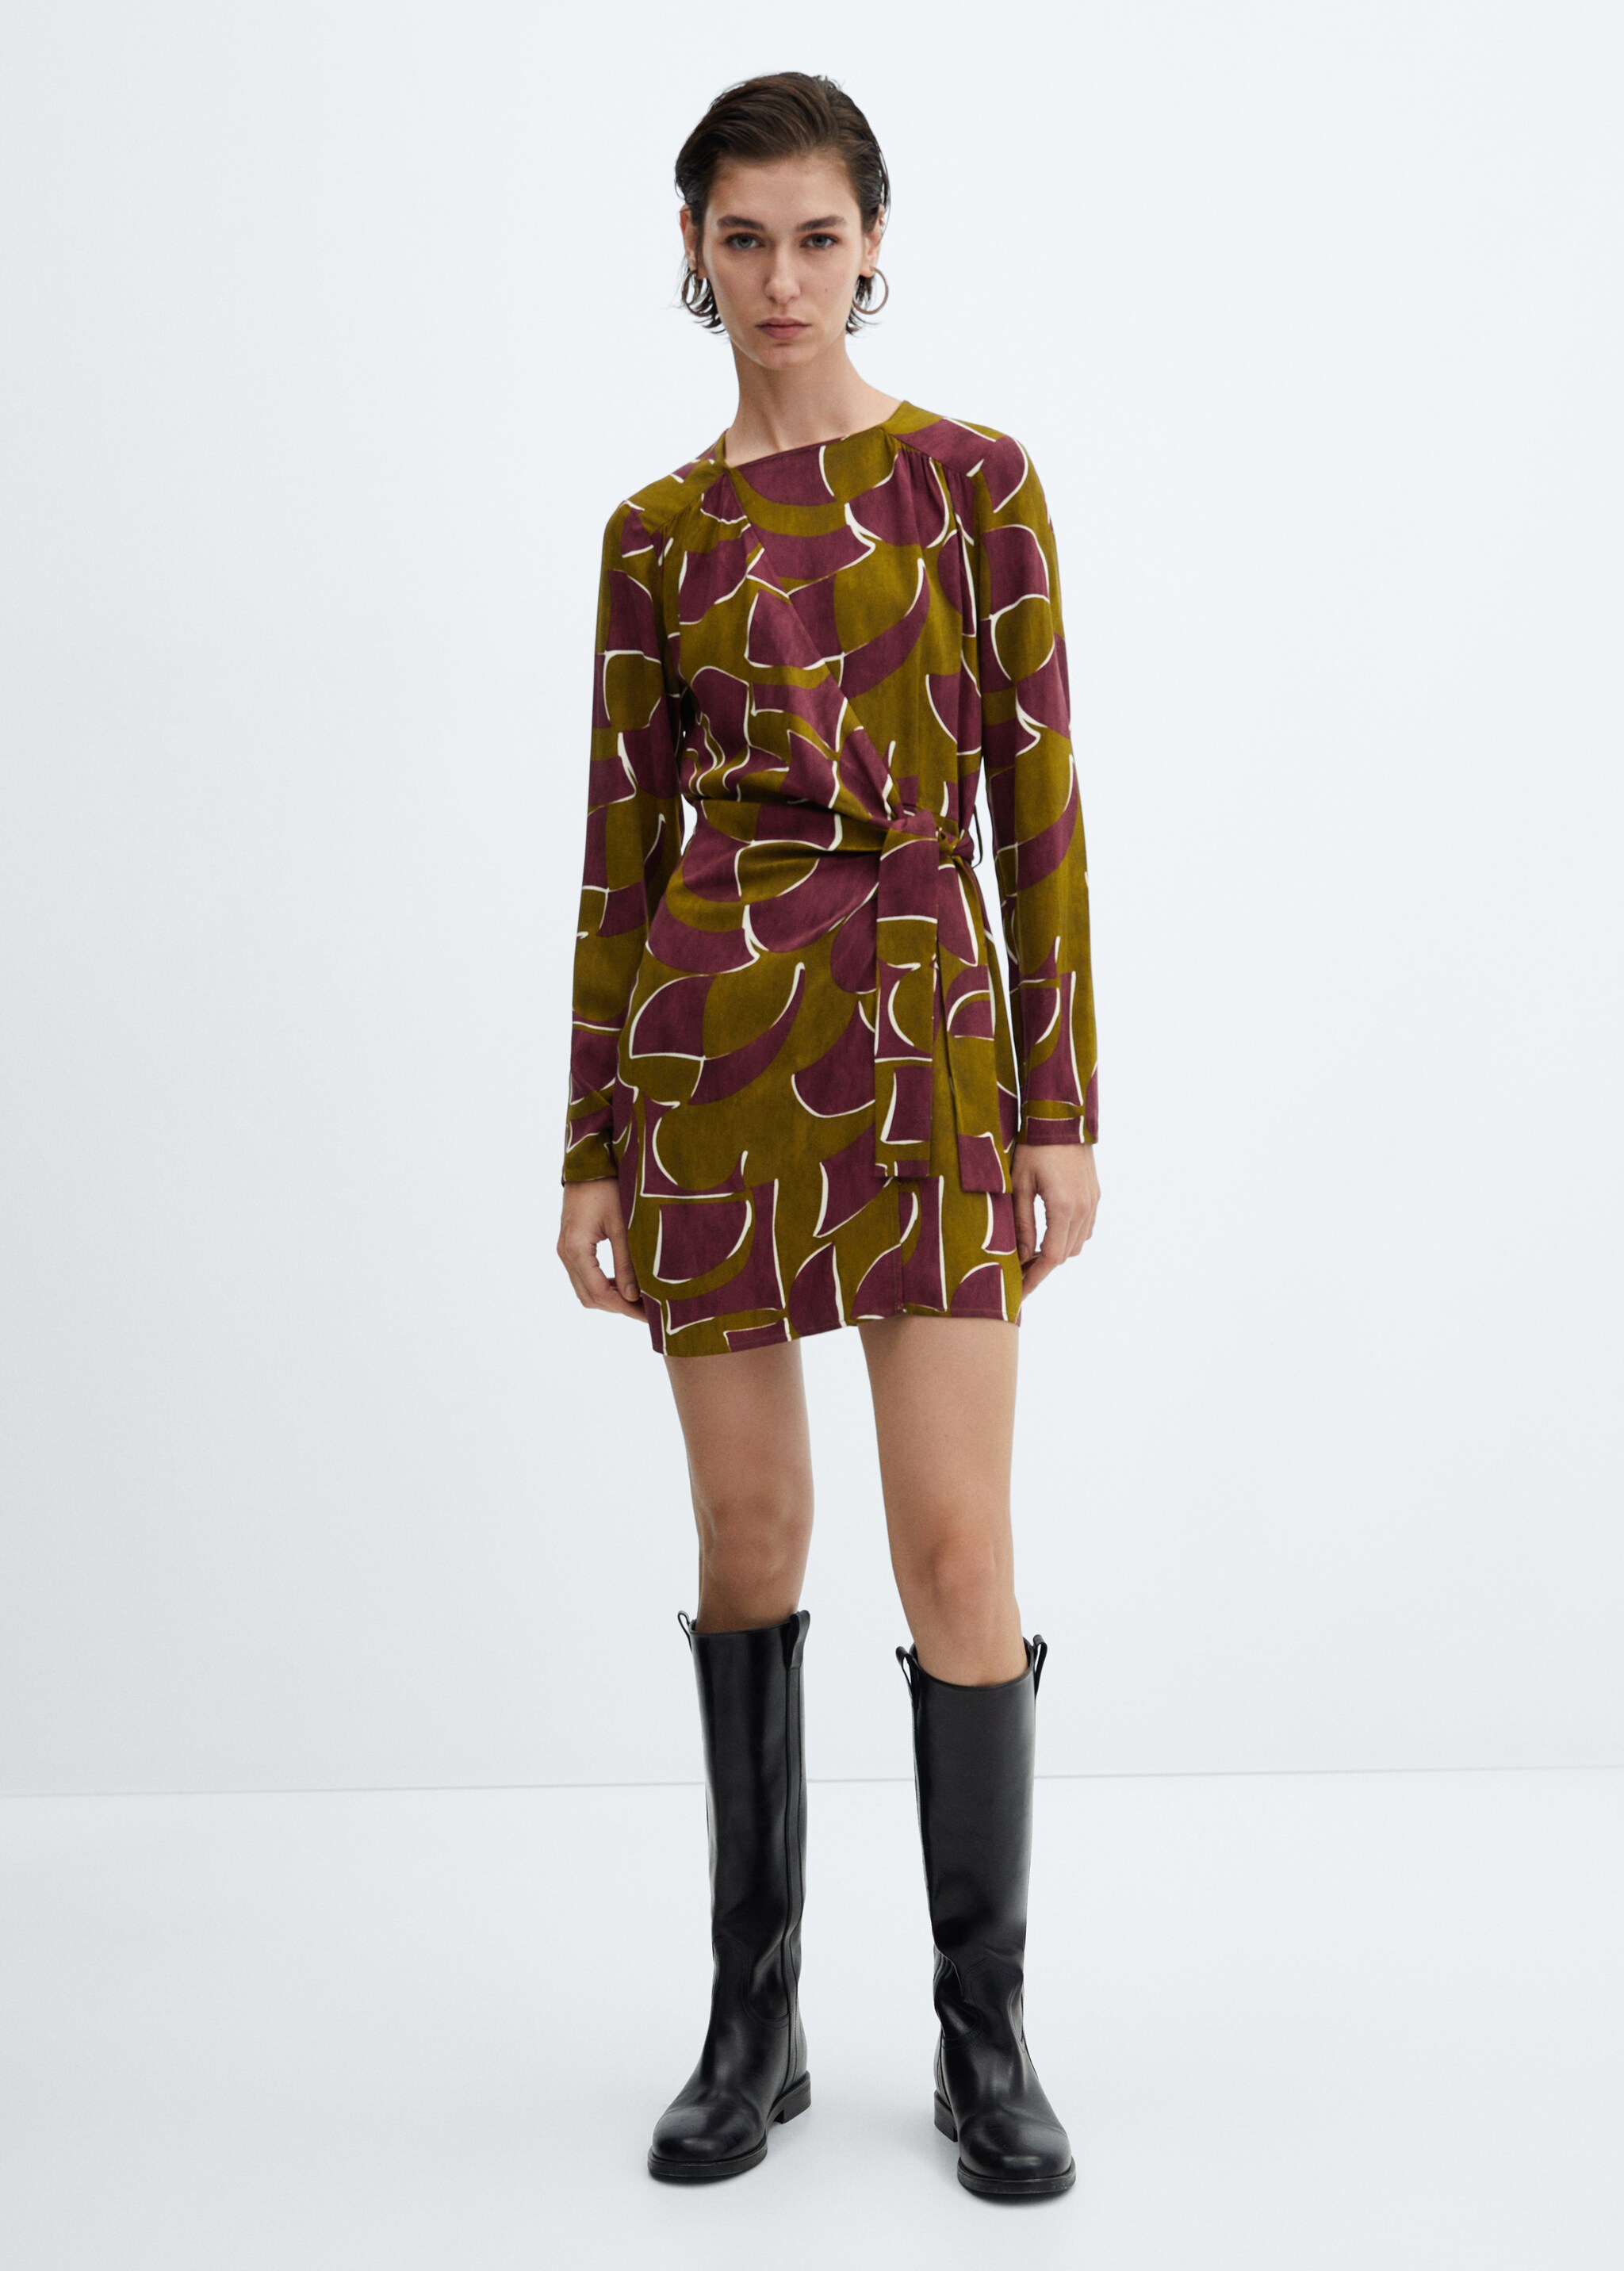 Knotted wrap dress - General plane